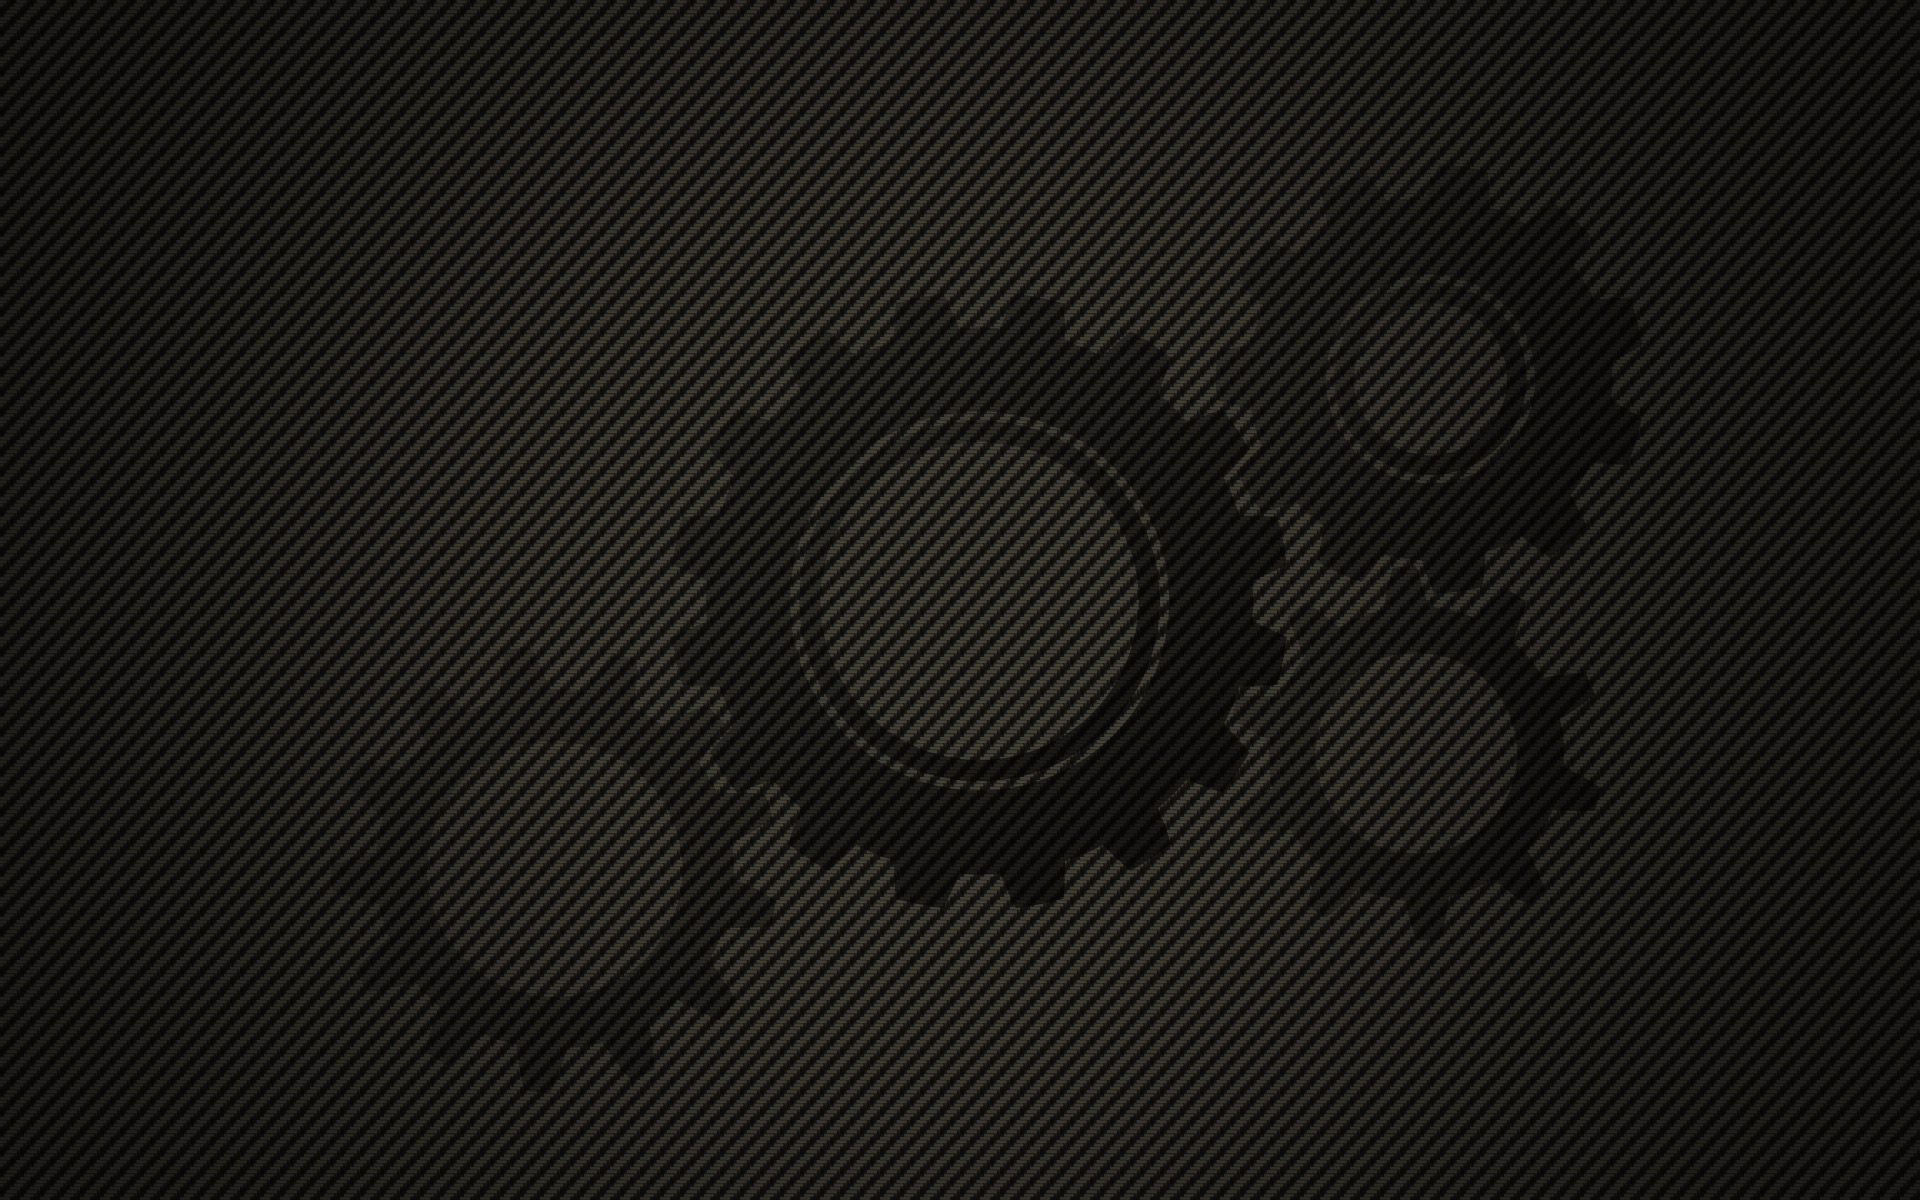 Gear Background Images HD Pictures and Wallpaper For Free Download   Pngtree